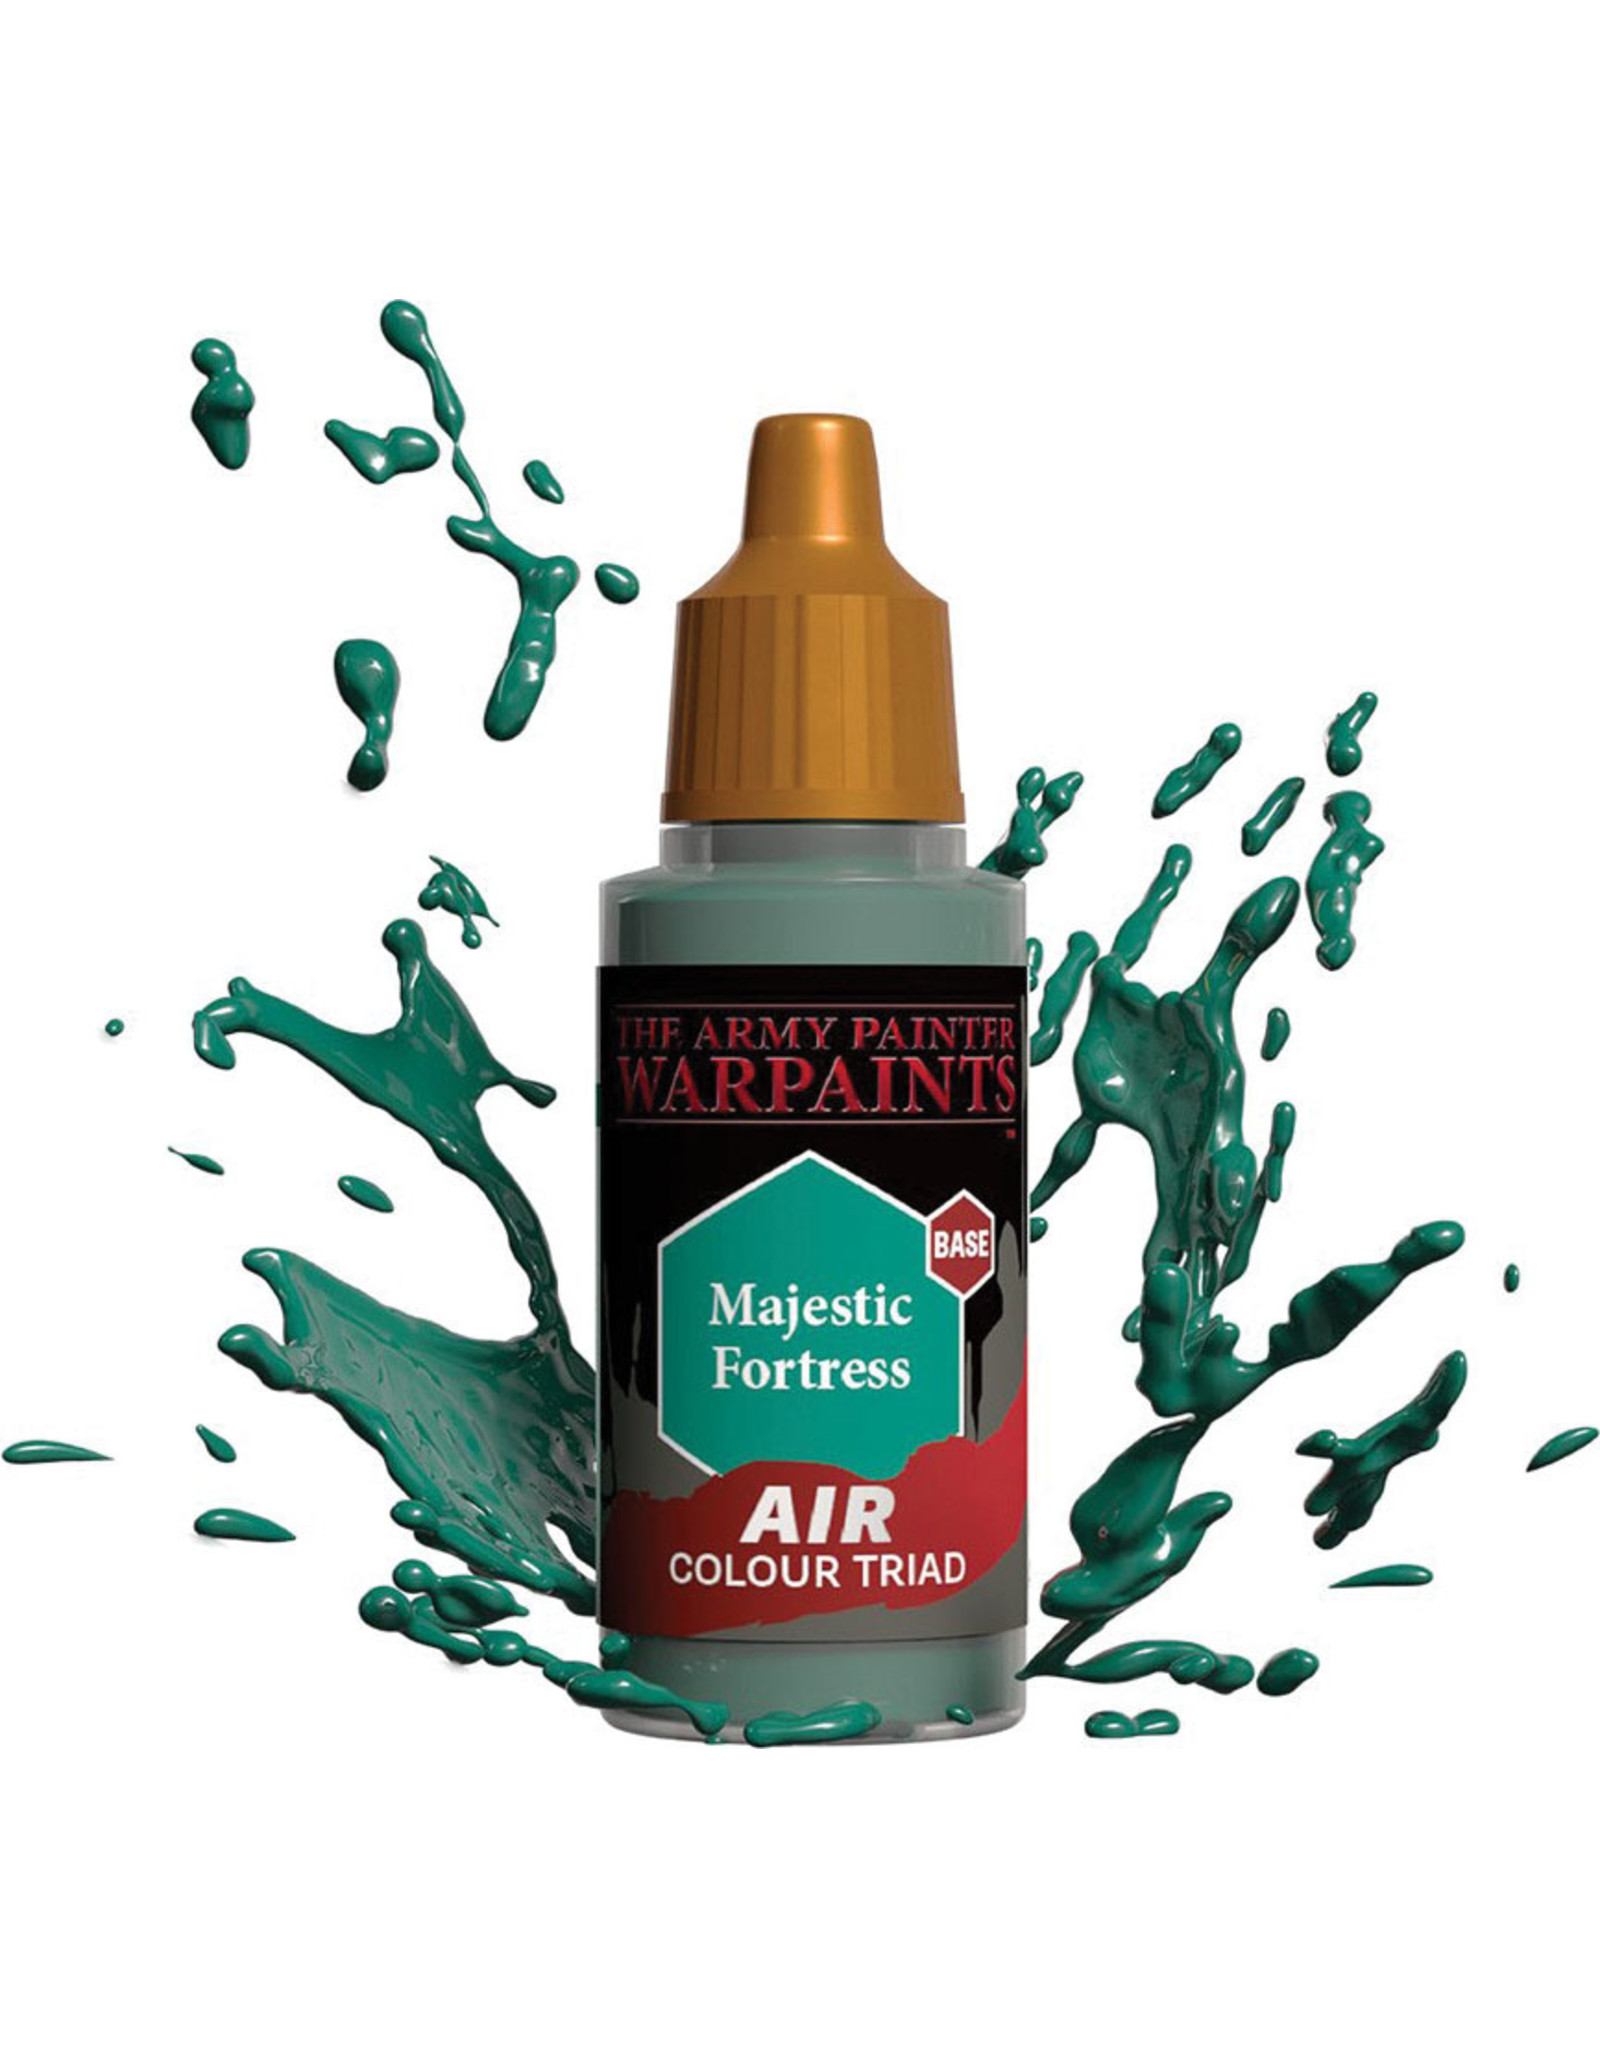 Army Painter Warpaint Air: Majestic Fortress, 18ml.